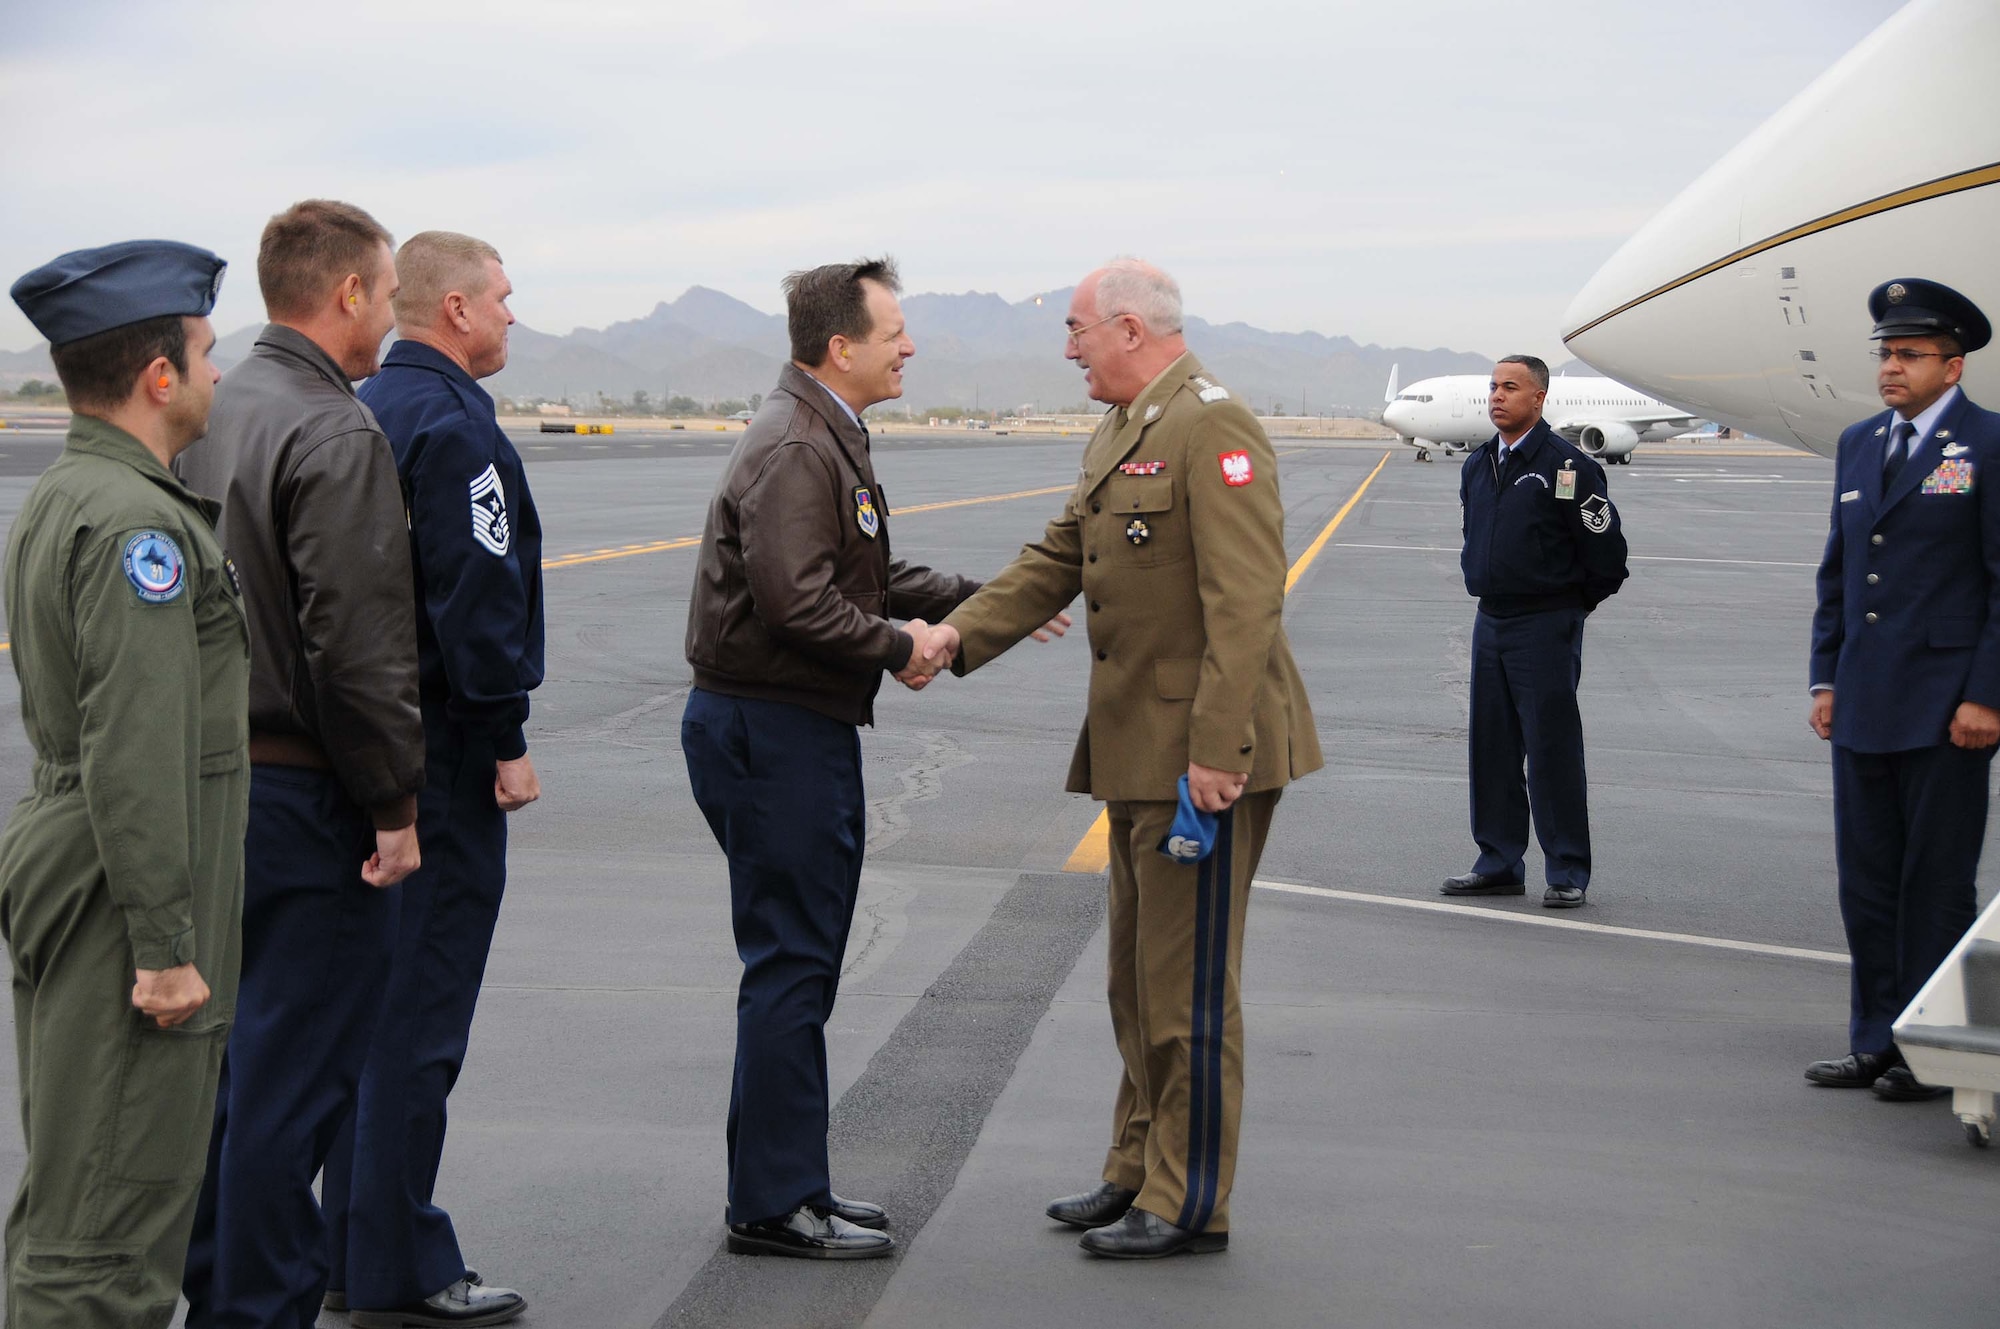 Polish Army Gen. Mieczyslaw Cieniuch (right), Chief of the General Staff of the Polish Armed Forces, is greeted at Tucson International Airport by Col. Mick McGuire, 162nd Fighter Wing commander, upon his arrival Jan. 12. (U.S. Air Force photo/Master Sgt. Dave Neve)